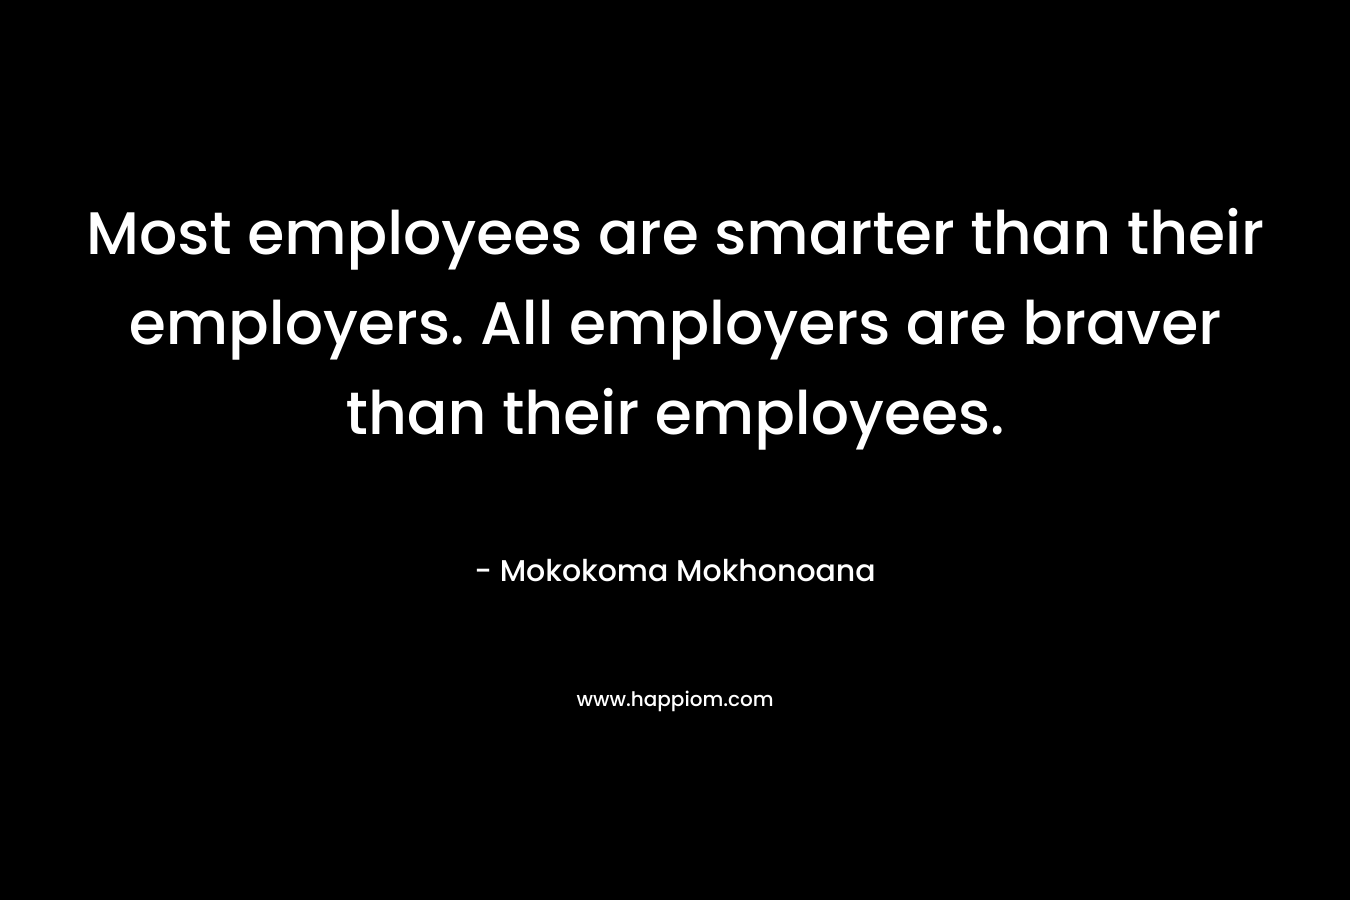 Most employees are smarter than their employers. All employers are braver than their employees. – Mokokoma Mokhonoana